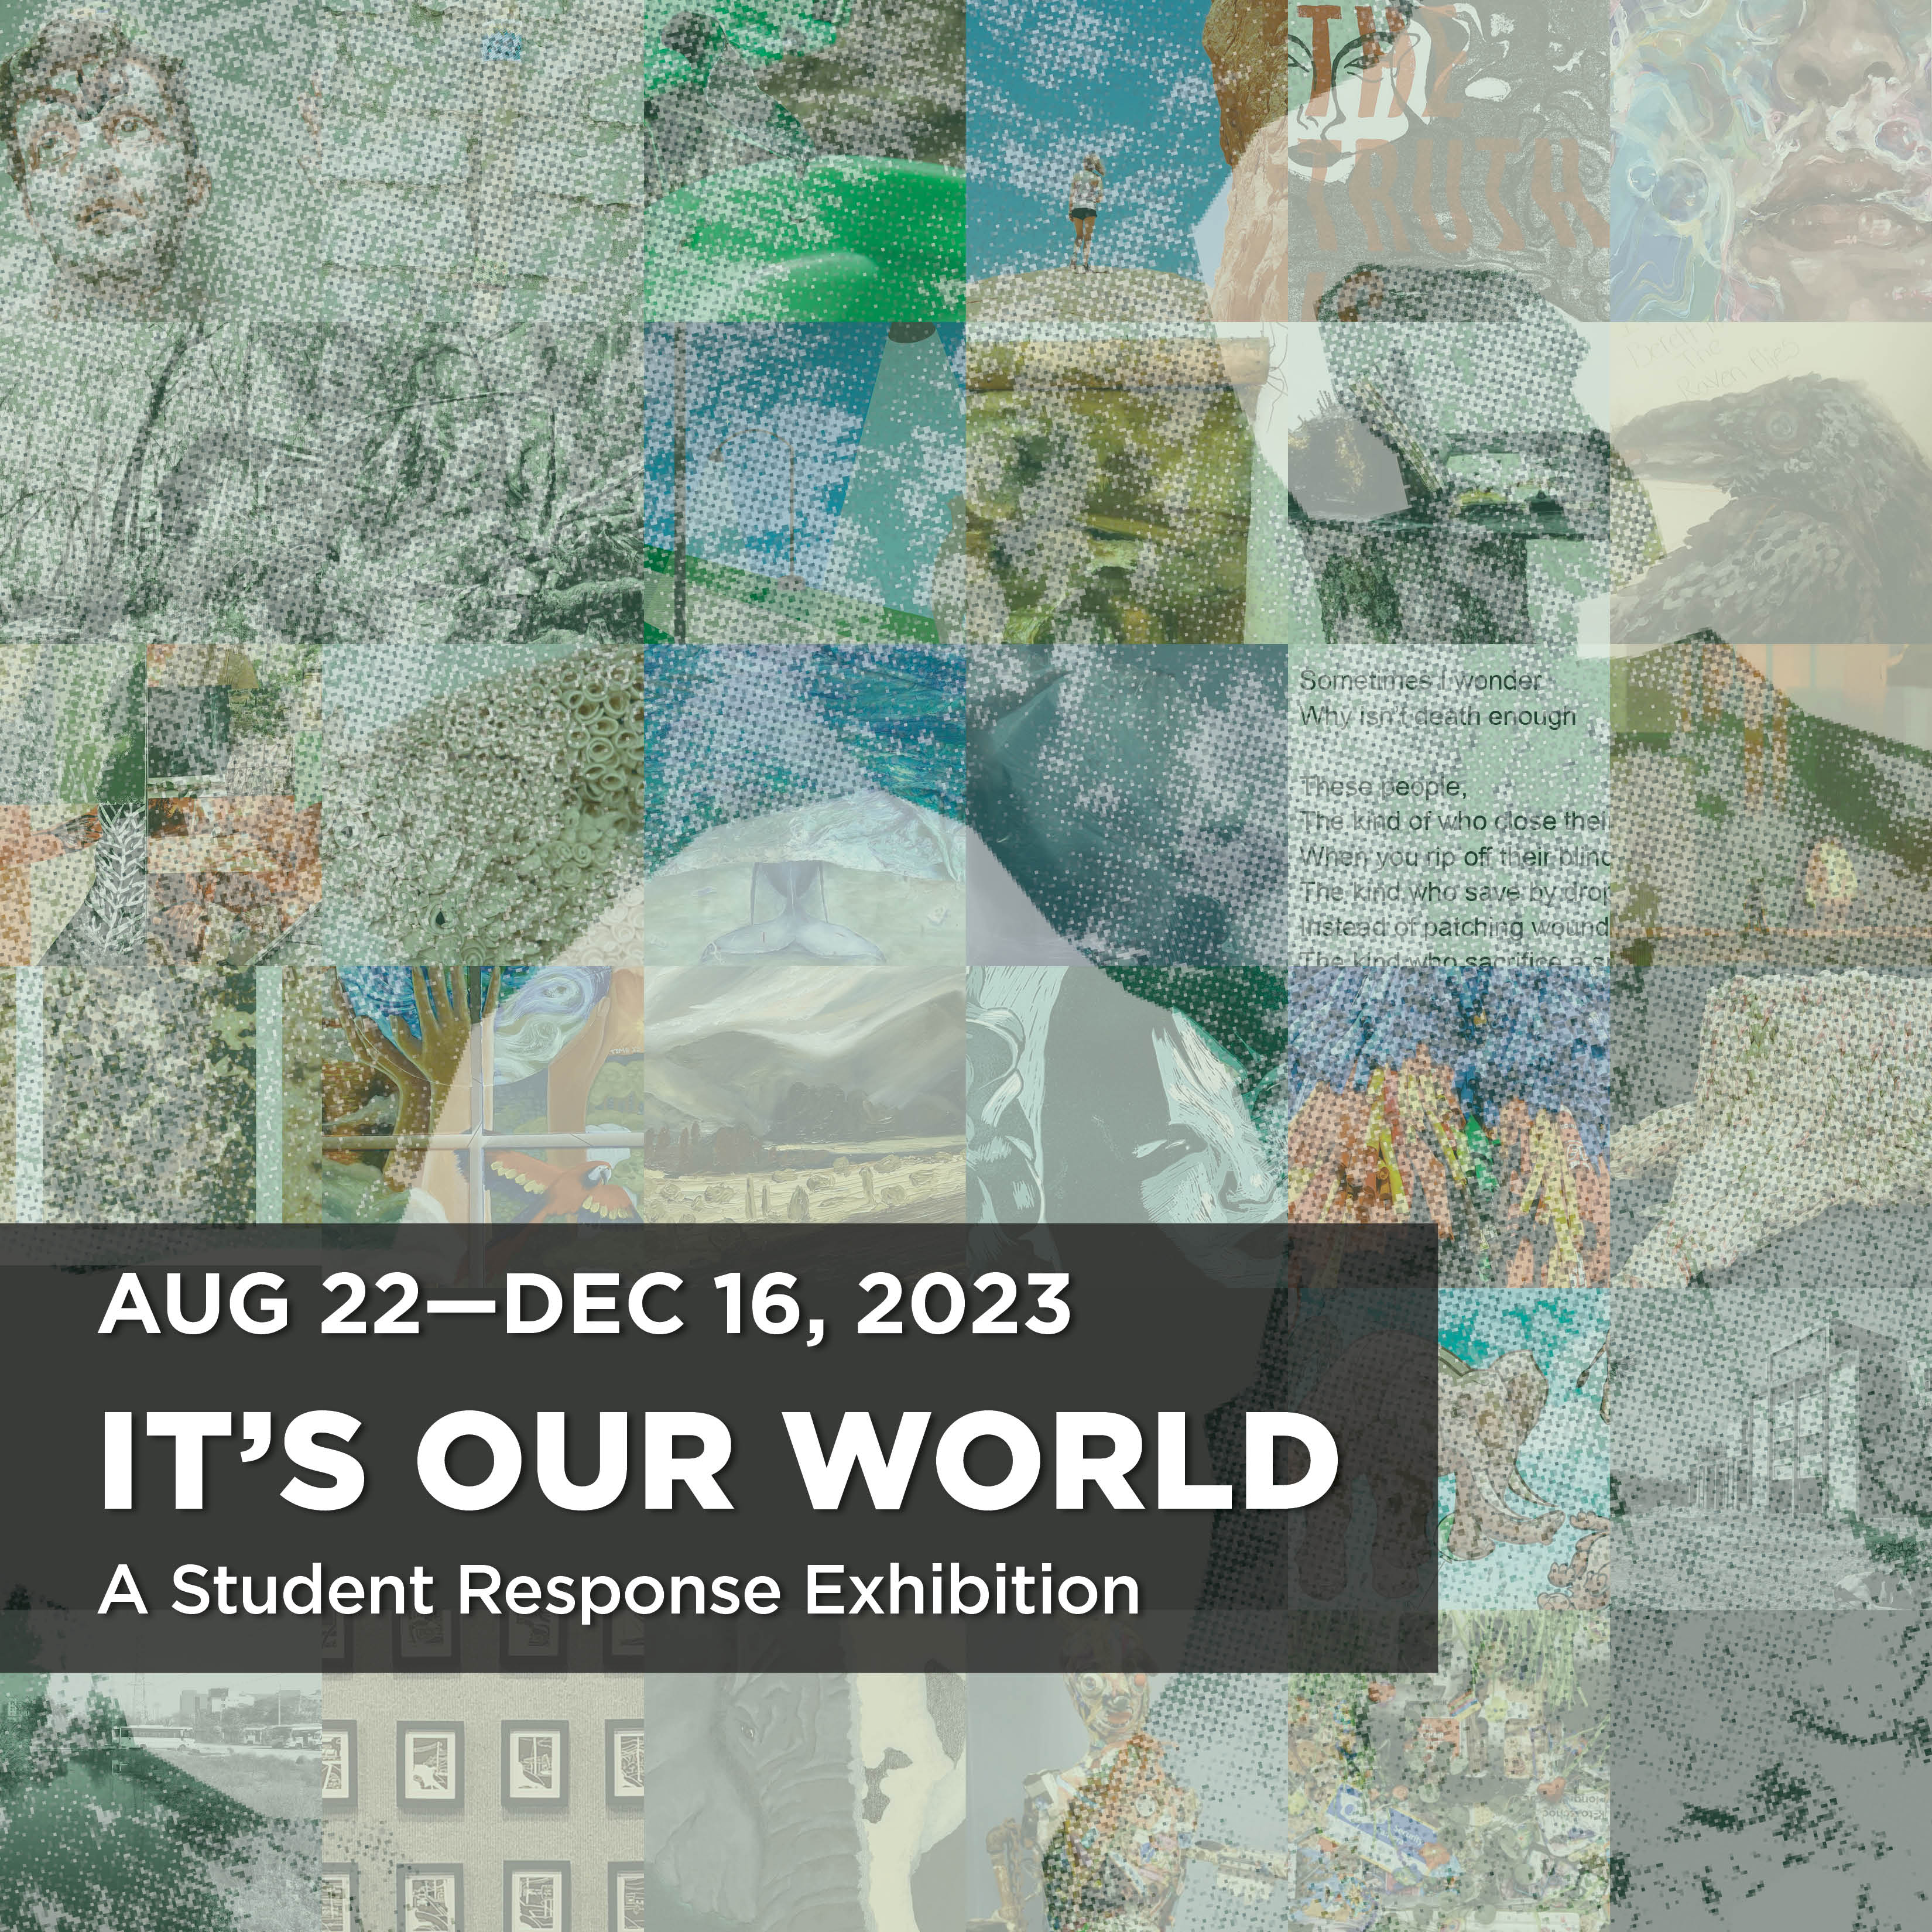 Student Response Exhibition title and dates of Aug 22-Dec 16 with logo of hands and world - It's Our World